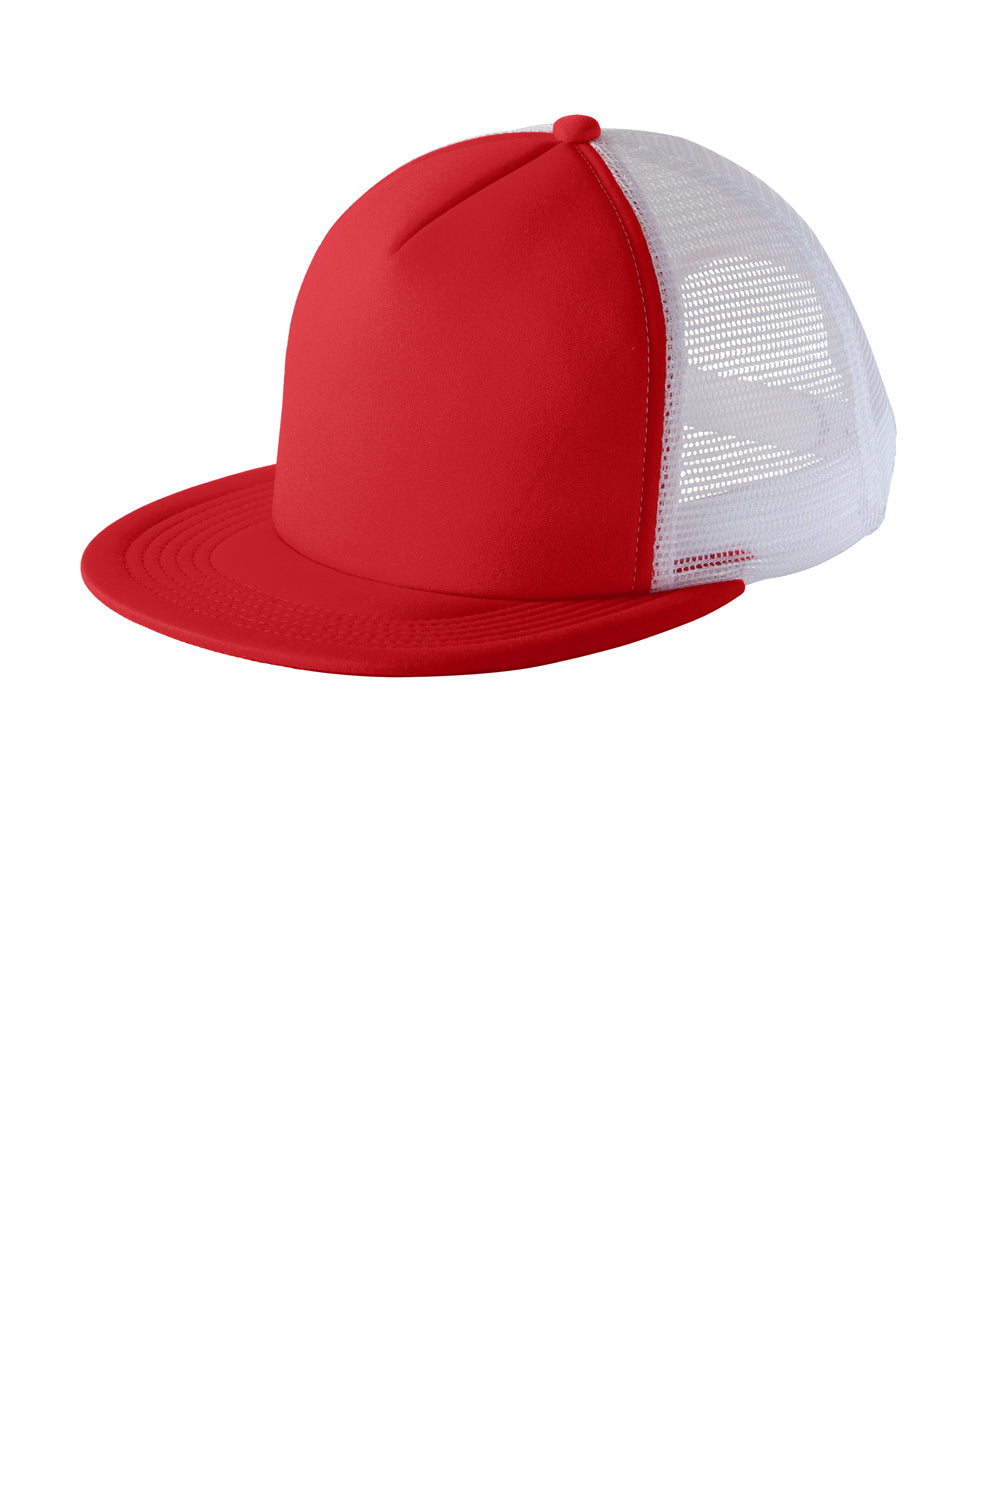 District DT624 Flat Bill Snapback Trucker Hat New Red Front